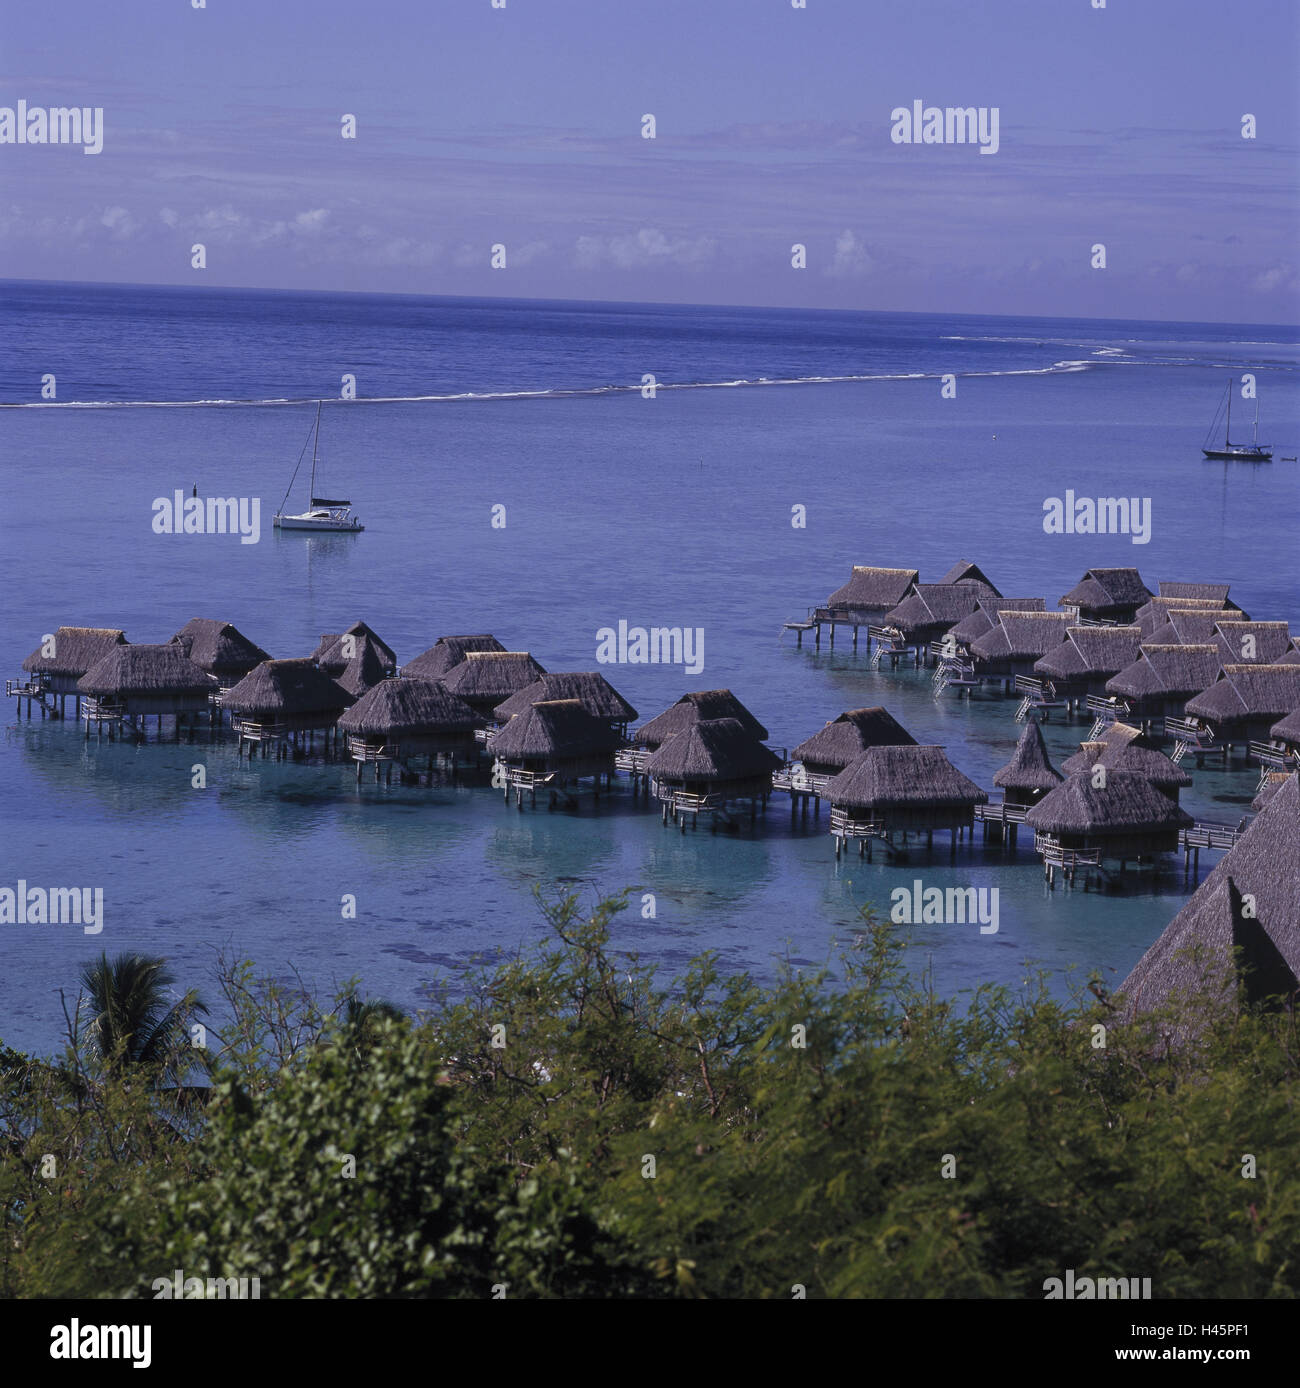 French Polynesia, Moorea, Sofitel, holiday's plant, sea, building on stilts, the Pacific, bridge, wooden jetty, hut, straw roofs, destination, tourism, vacation, Stock Photo